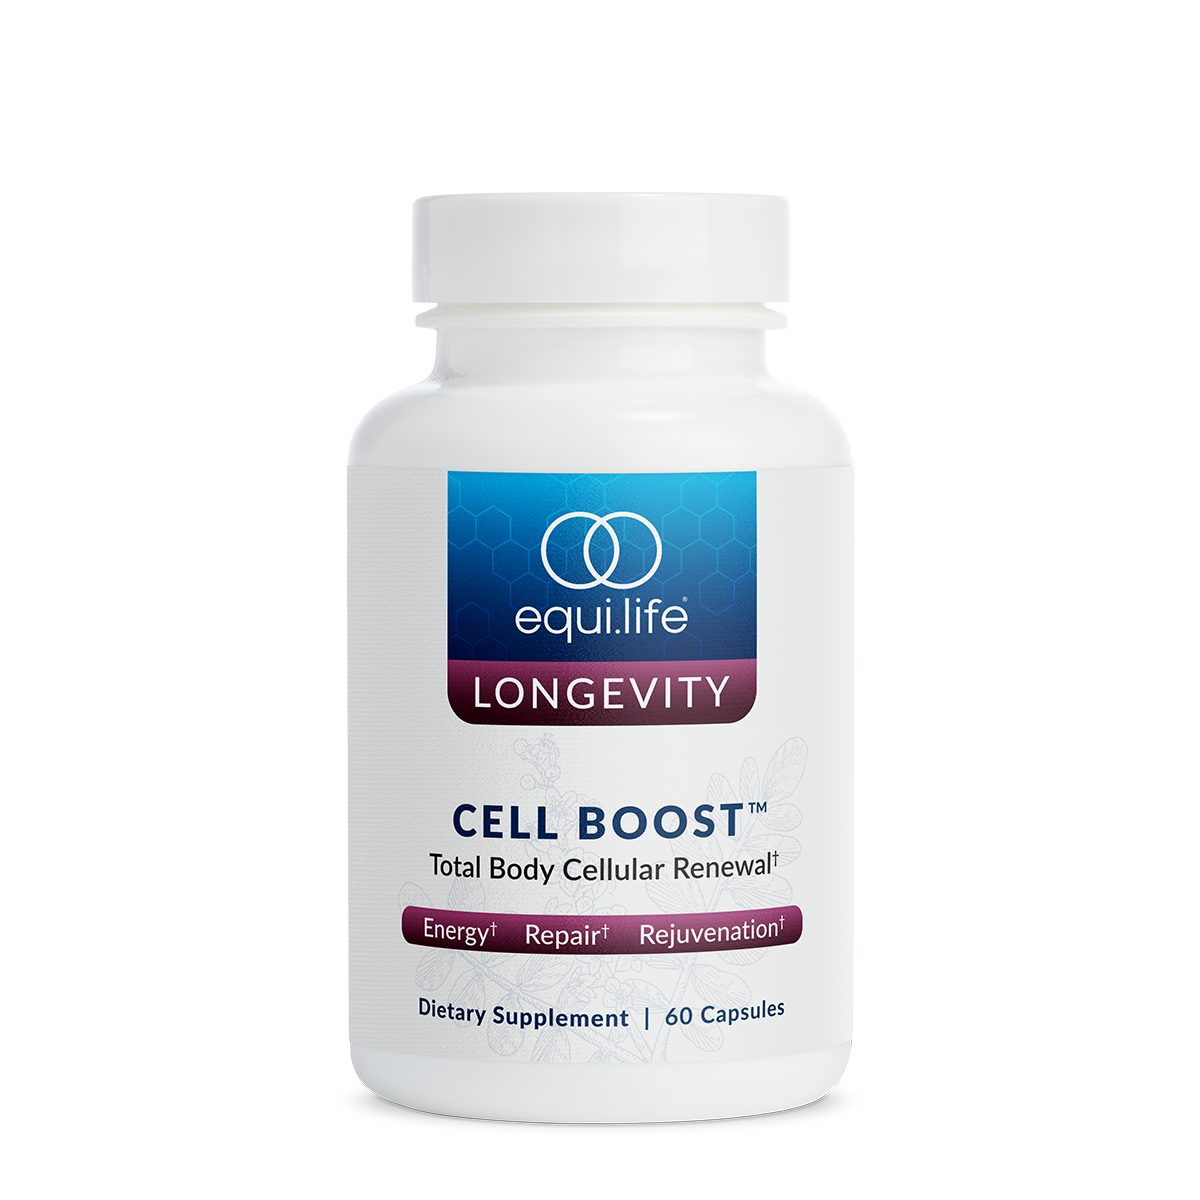 EquiLife Cell Boost